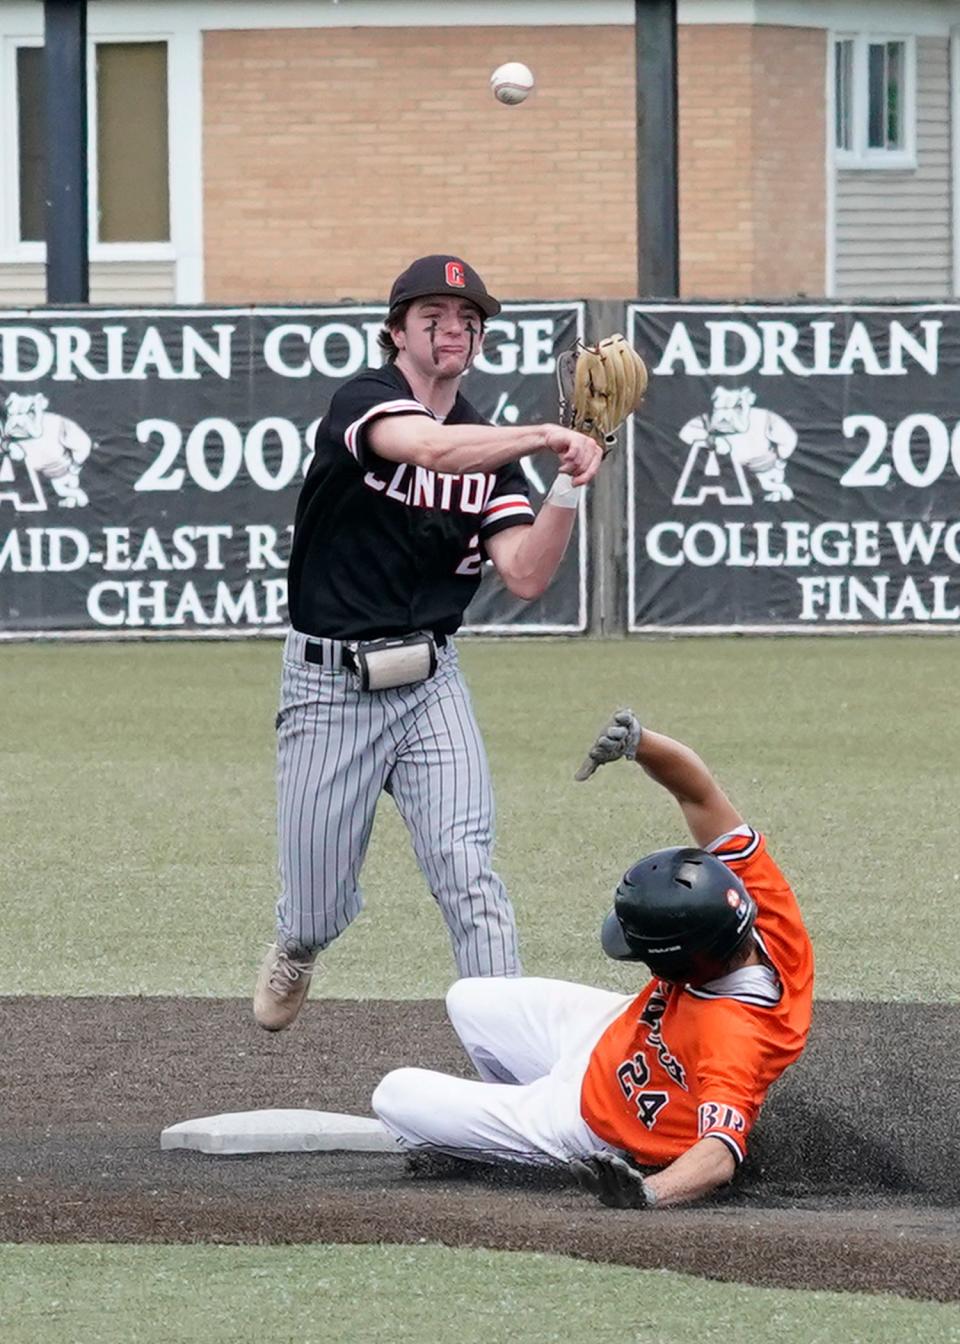 Clinton's Ryan Tschirhart throws to first for a double play after getting a force out at second base while Hudson's Anthony Arredondo slides into the base during Saturday's MHSAA Division 3 regional championship game at Nicolay Field on the campus of Adrian College.